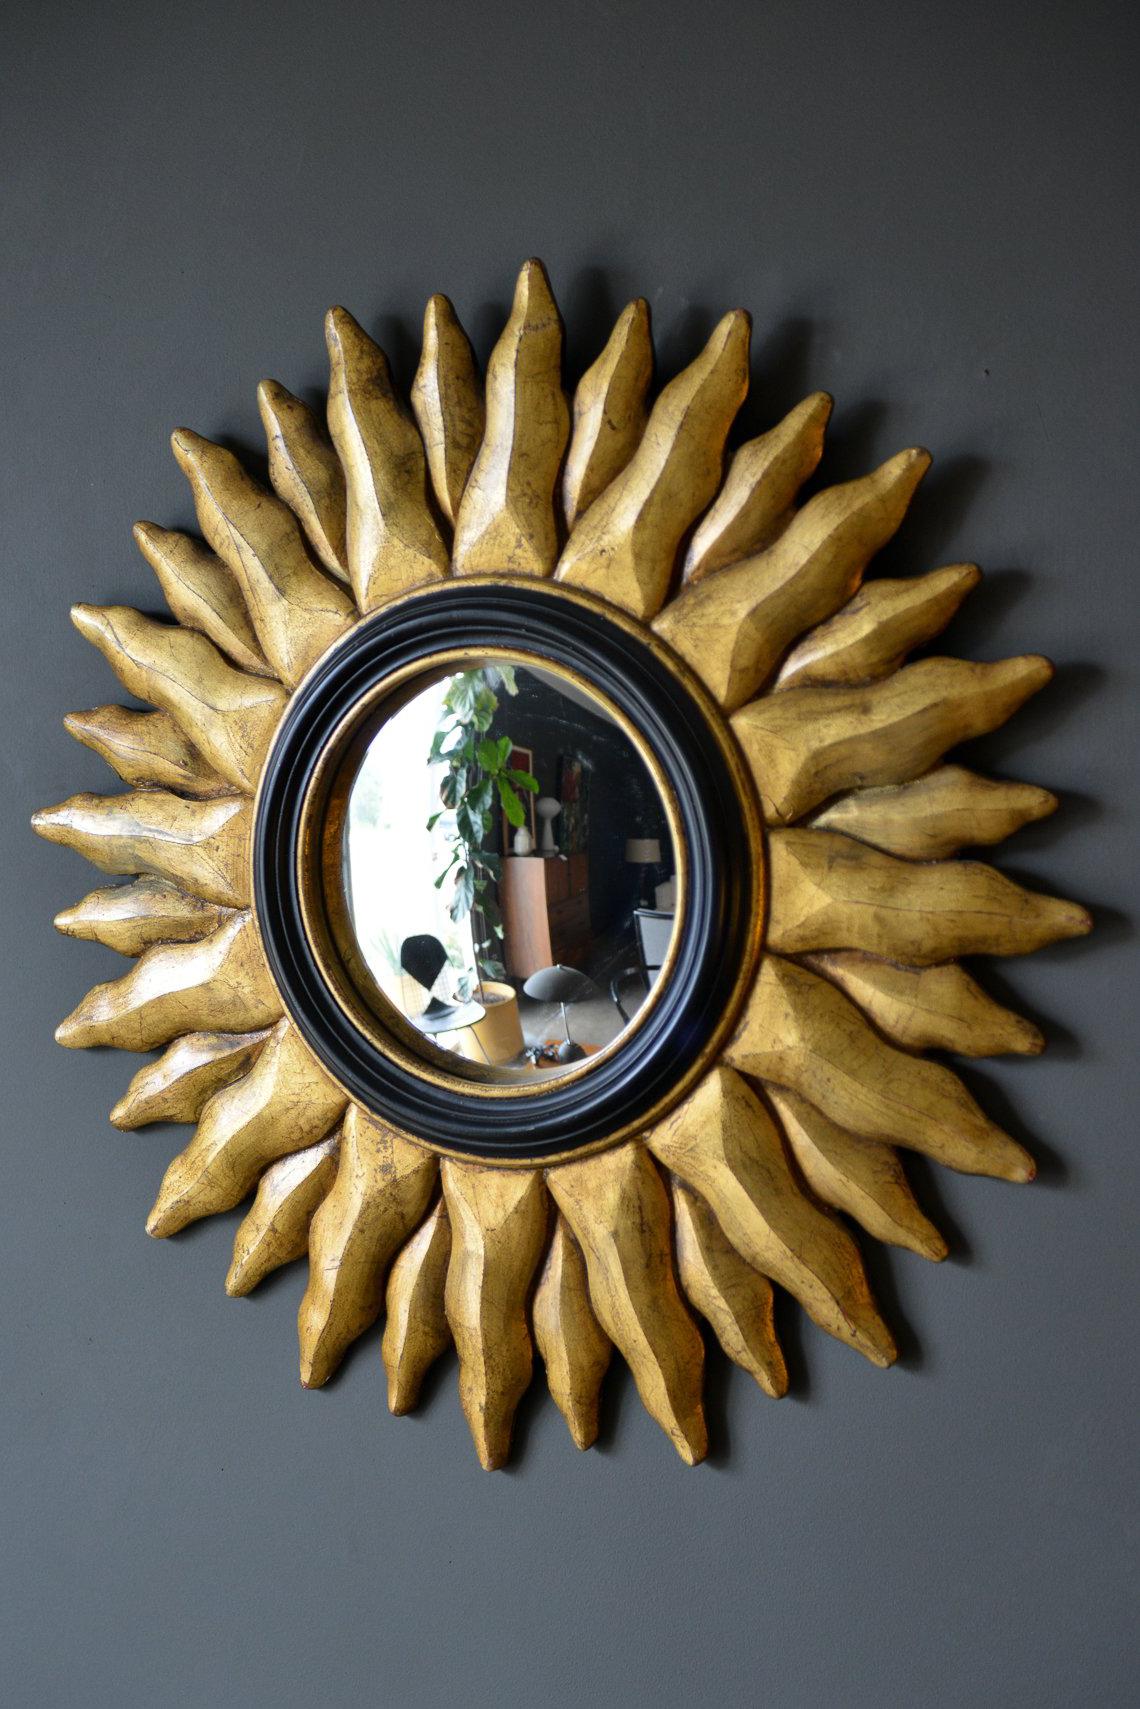 Vintage giltwood convex sunburst mirror, circa 1970. Beautiful gold gilt to the wood and a vintage convex mirror, trimmed in a black border in very good vintage condition. Heavy piece, which is indicative of the age of the mirror and wood. Measures: